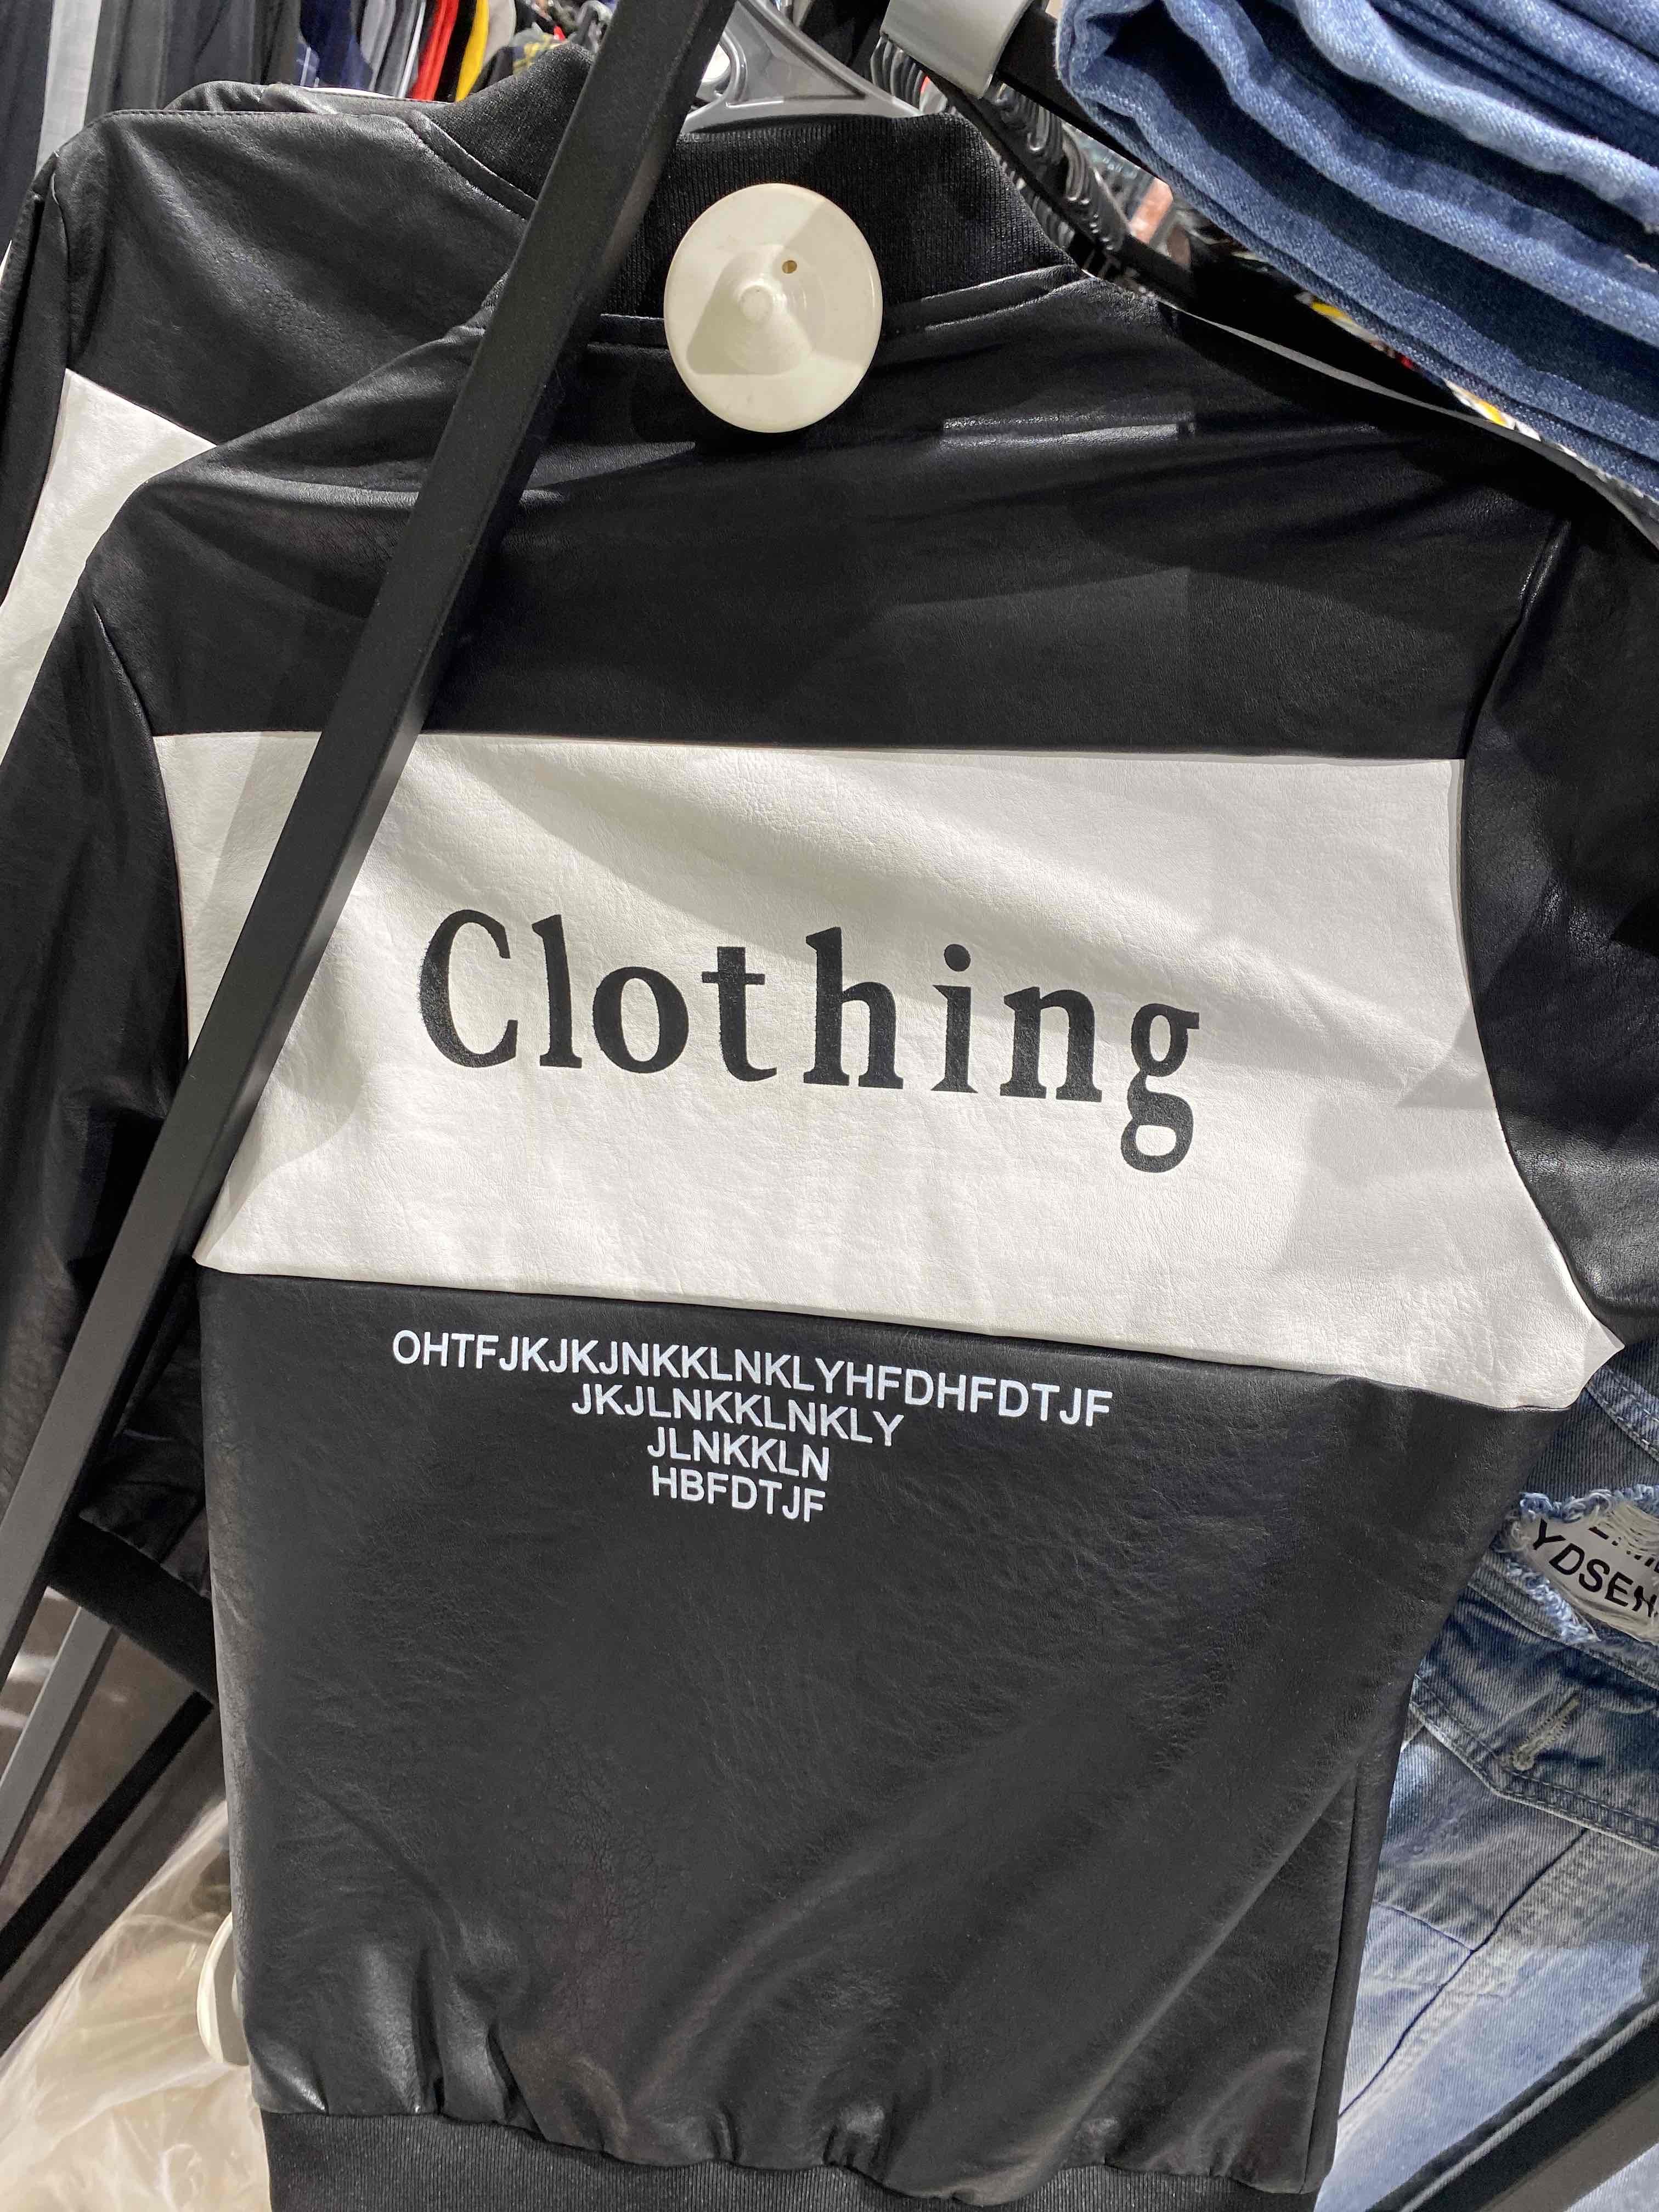 a shirt with text on it. the text says "clothing" then a bunch of random letters.